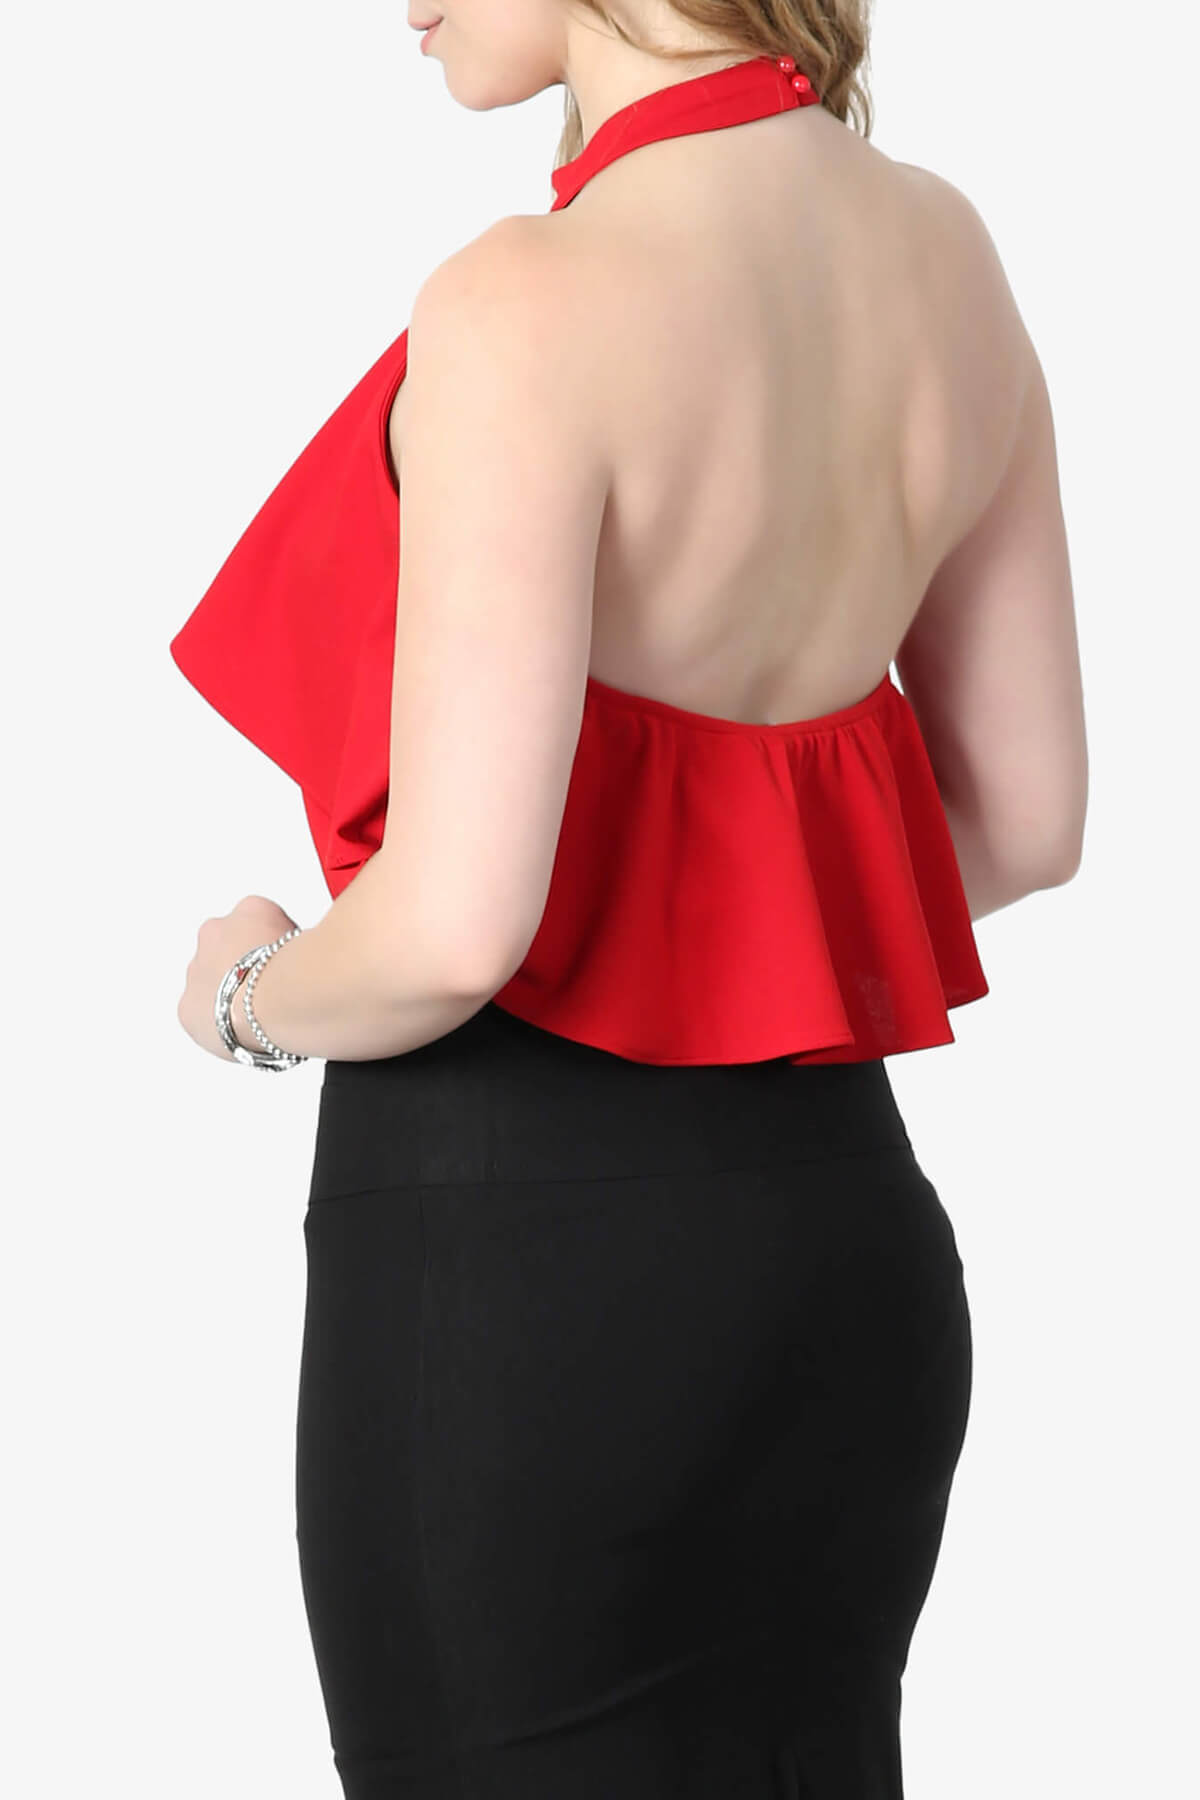 Load image into Gallery viewer, Raquel Ruffle Halter Bodysuit Top RED_4
